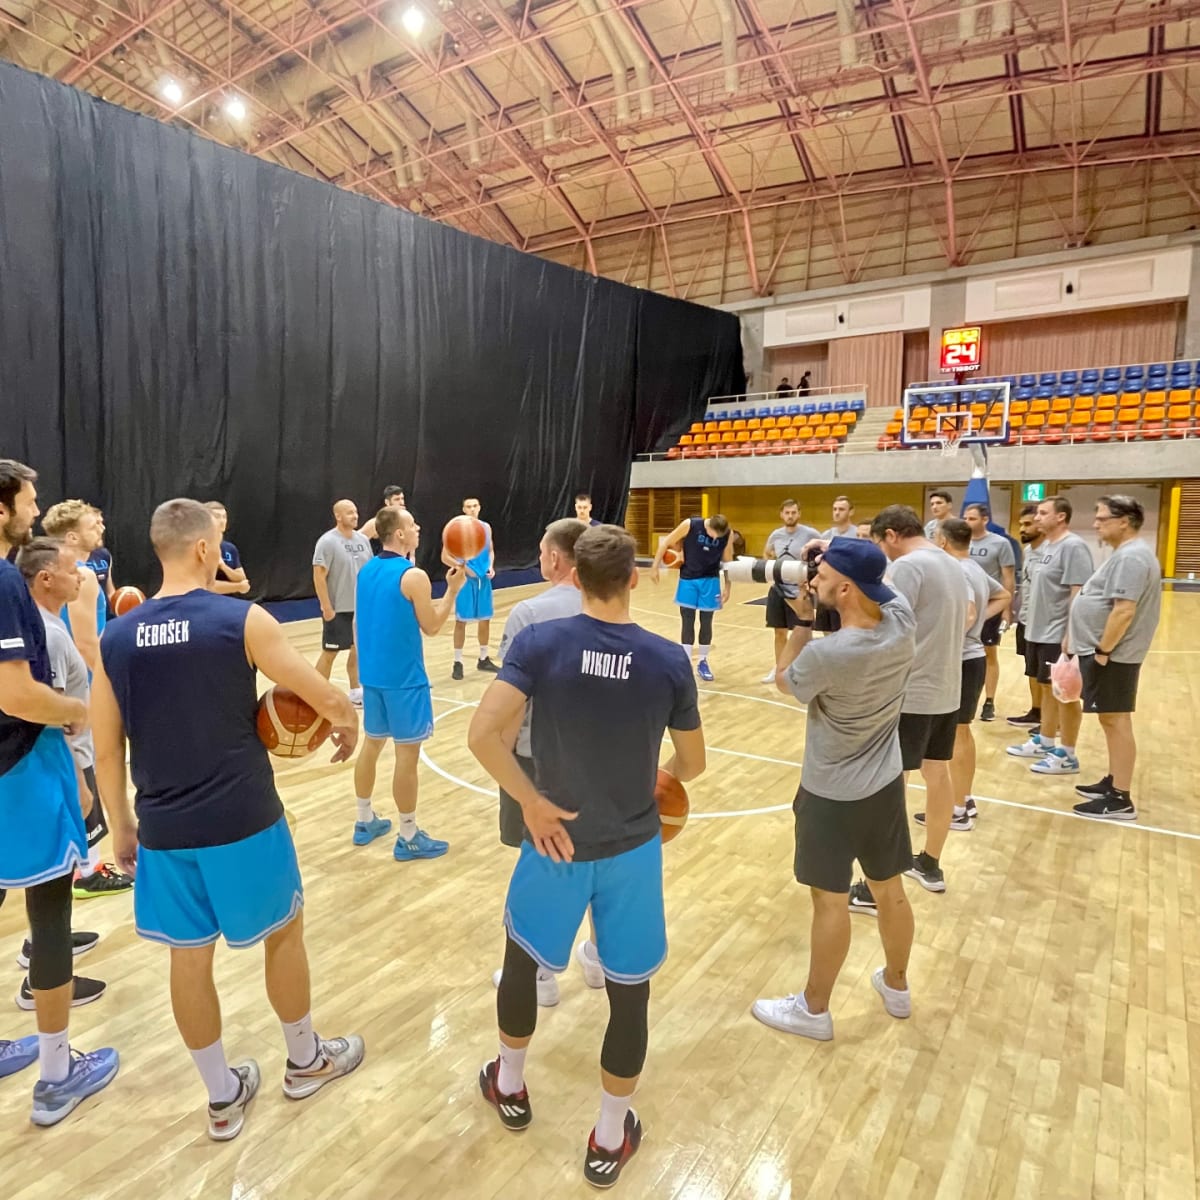 Luka Doncic headlines Slovenia's preliminary roster for World Cup